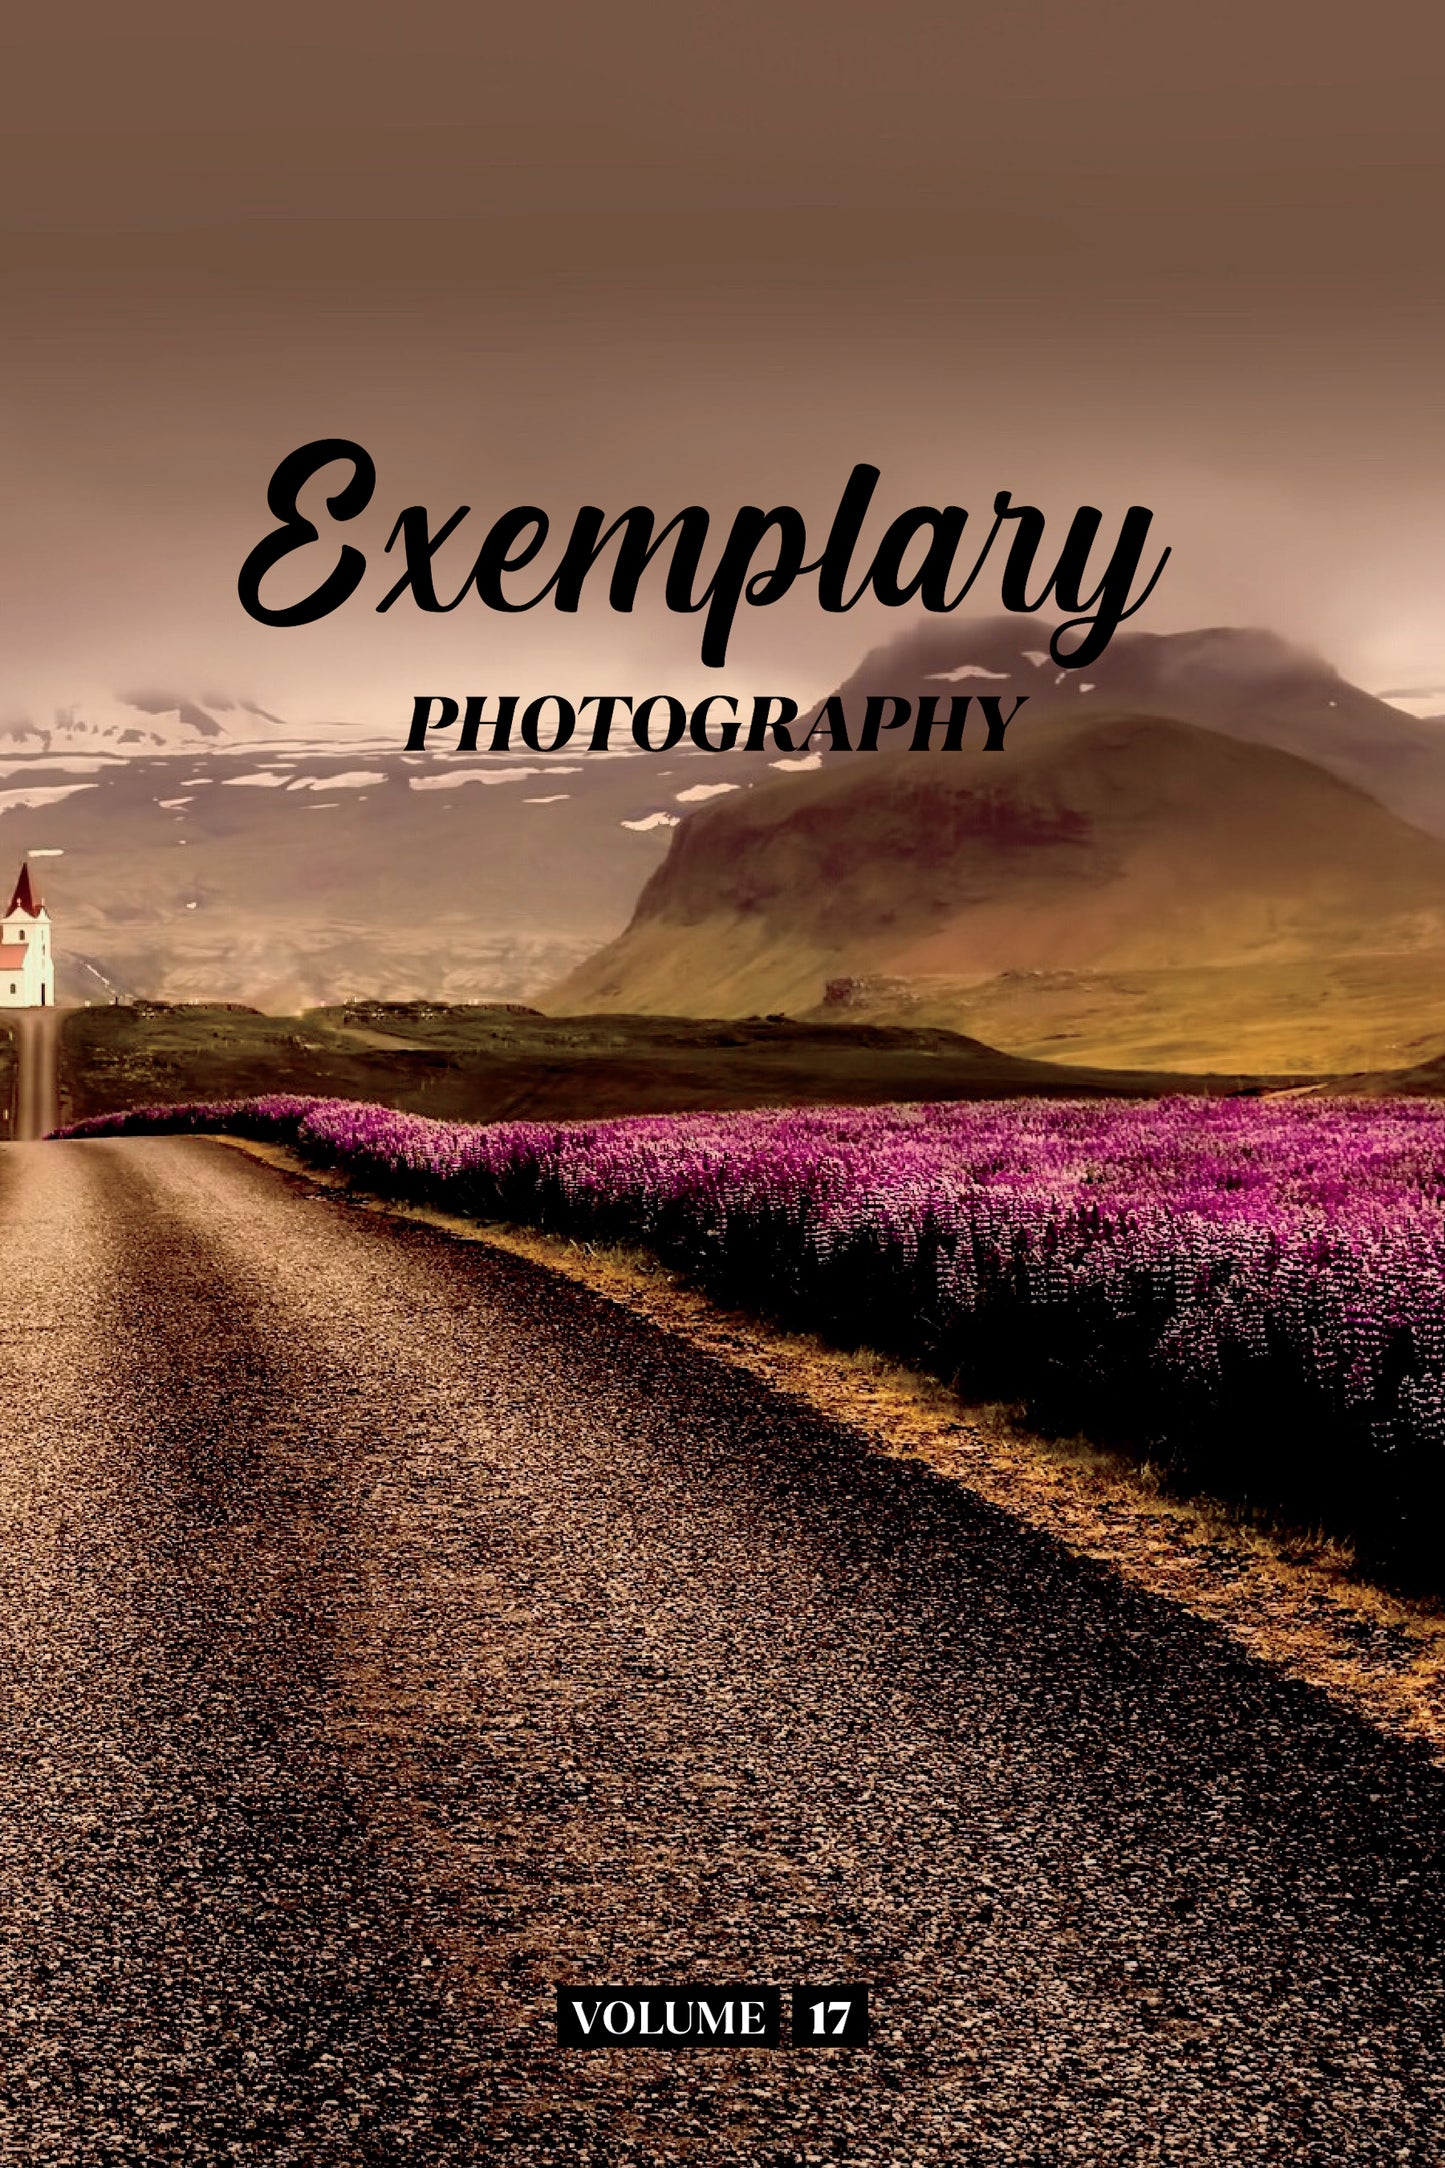 Exemplary Photography Volume 17 (Physical Book Pre-Order)